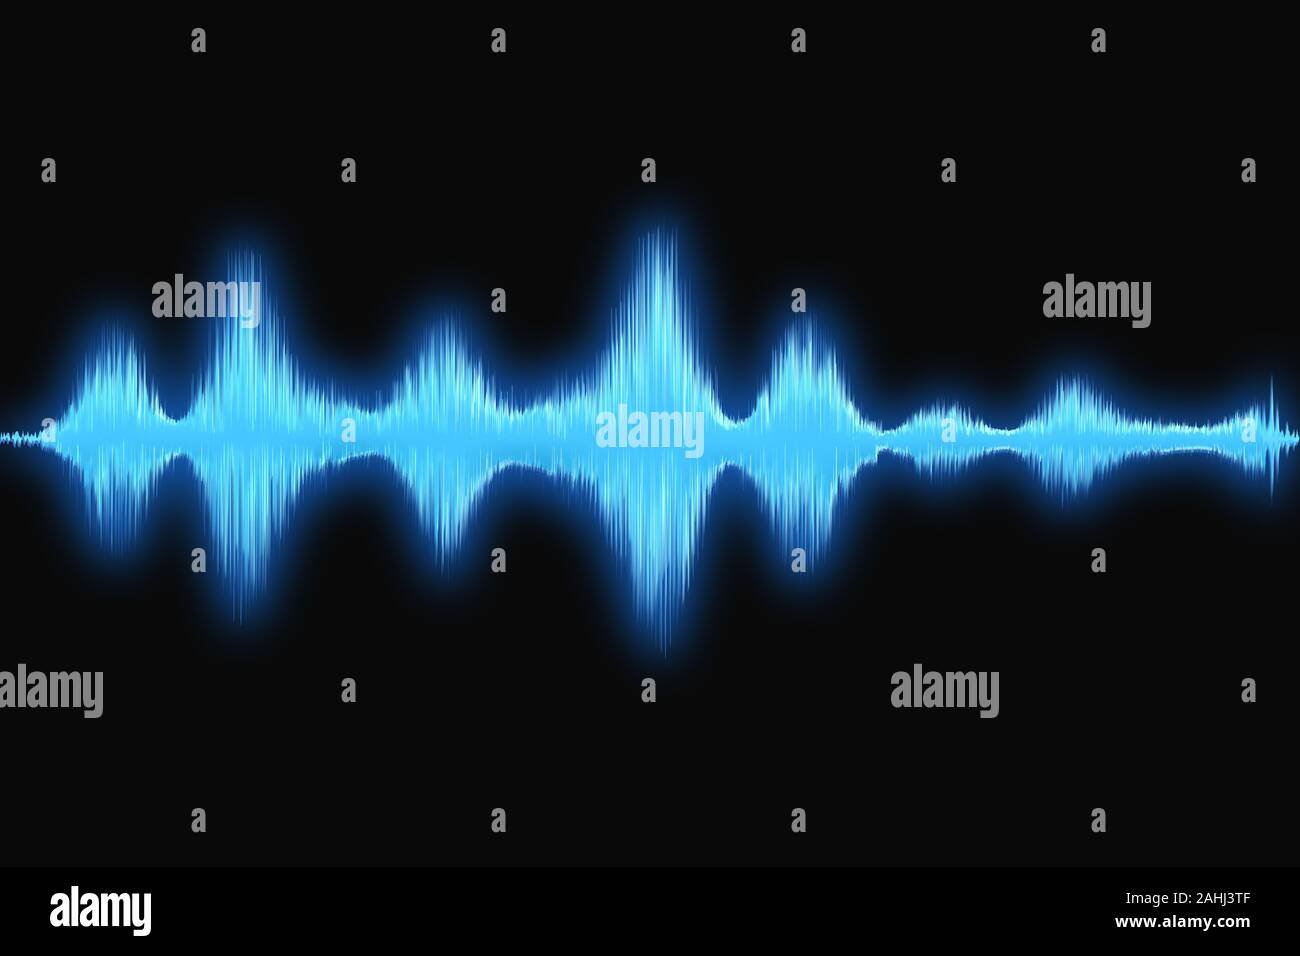 Blue sound wave effect, many period of frequency in one loop, blue aura of  the wave on black background Stock Photo - Alamy